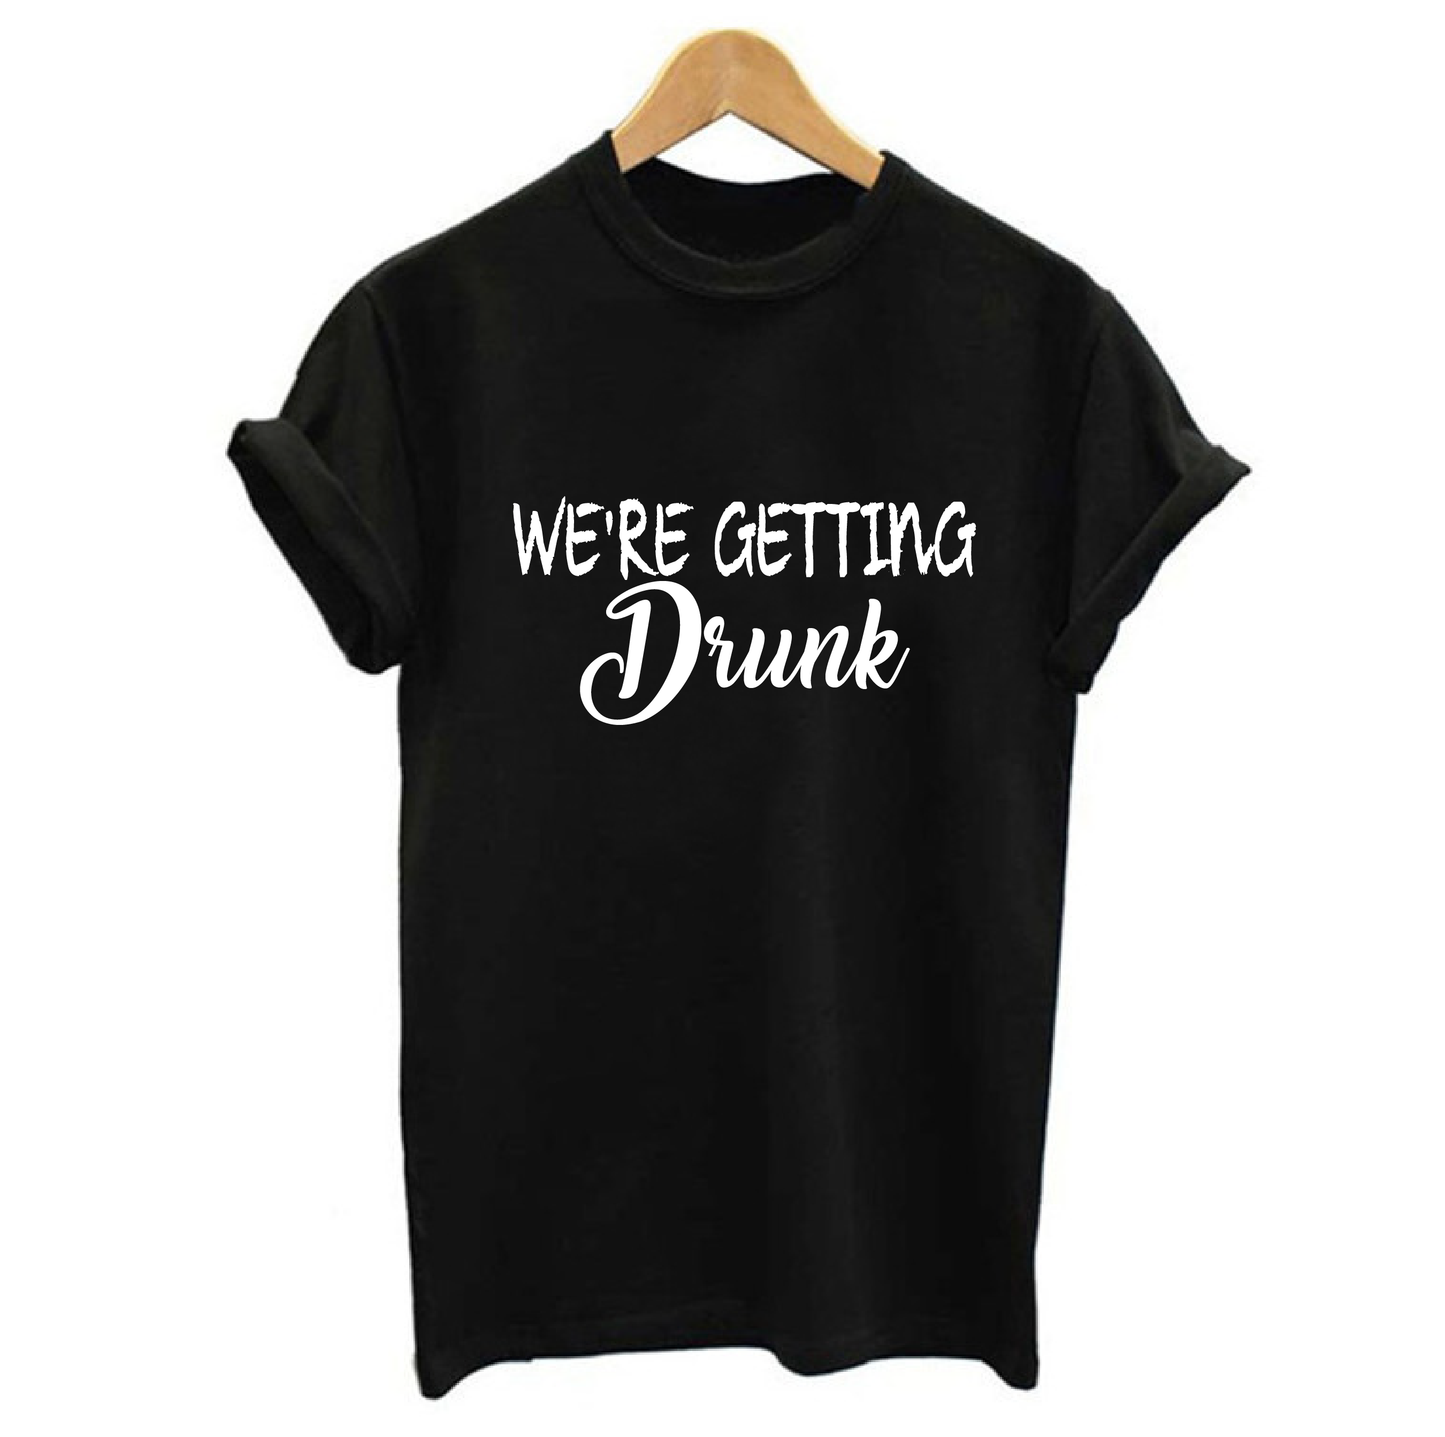 I'm getting Married & We're getting Drunk T-shirts